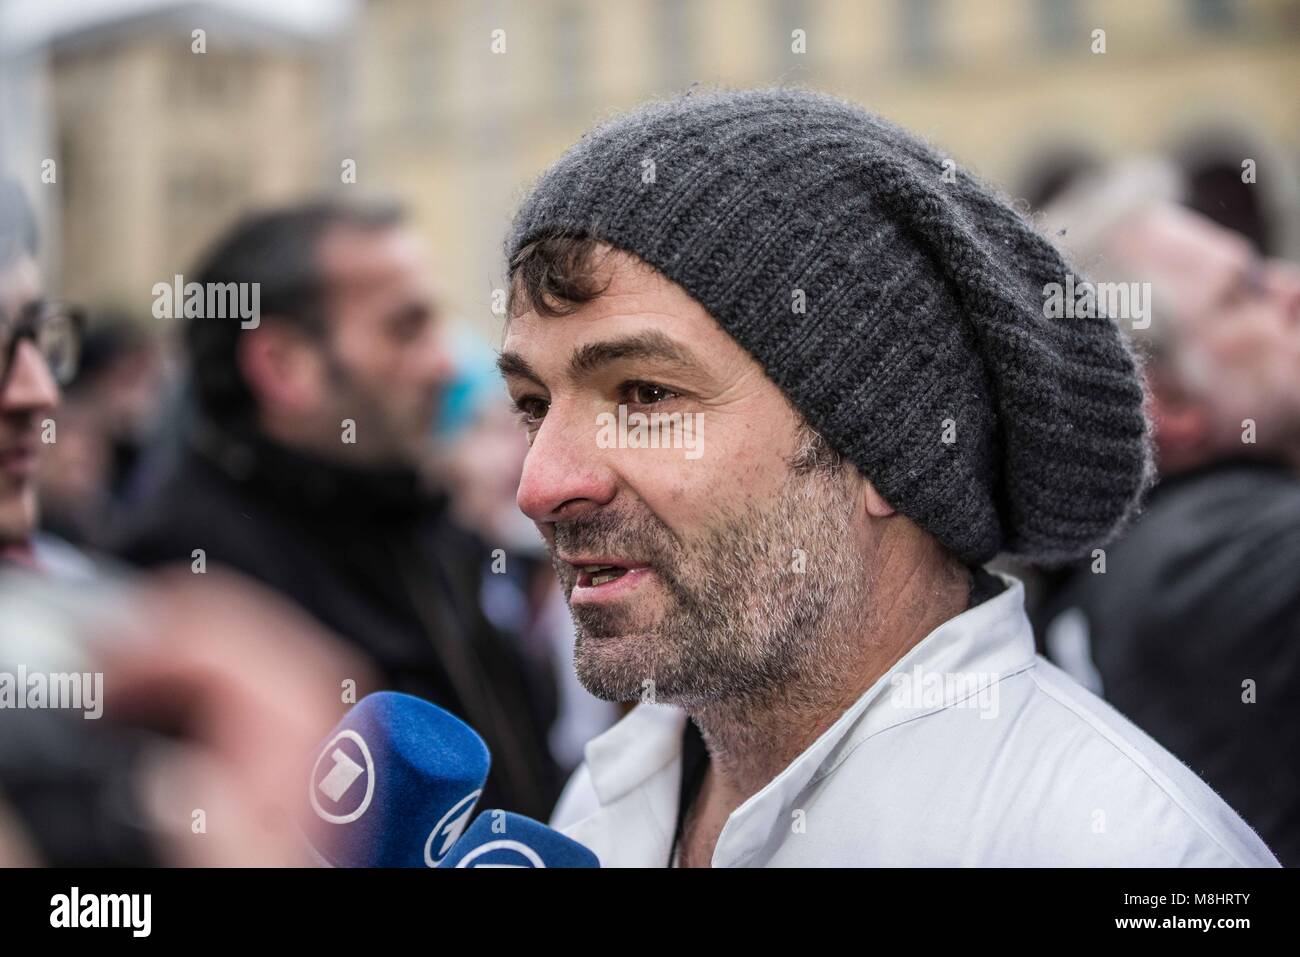 Munich, Bavaria, Germany. 17th Mar, 2018. Protesting against the arrival of Pegida Dresden's Lutz Bachmann and Sigfried Daebritz in Munich, no less than three demonstrations were organized by the city, including a Muenchen ist Bunt and Bellevue di Monaco protest at Max Joseph Platz. At this demonstration, choirs were in attendance, along with celebrities, politicians, and other prominent Muenchners dressed as doctors in order to tell Pegida that they will help them go back to Dresden. Participants: Syrischer Friedenschor, MÃ¼nchner Kneipenchor, Der Chor der Schlausschule, KÃ¶sk Chor, Cho Stock Photo